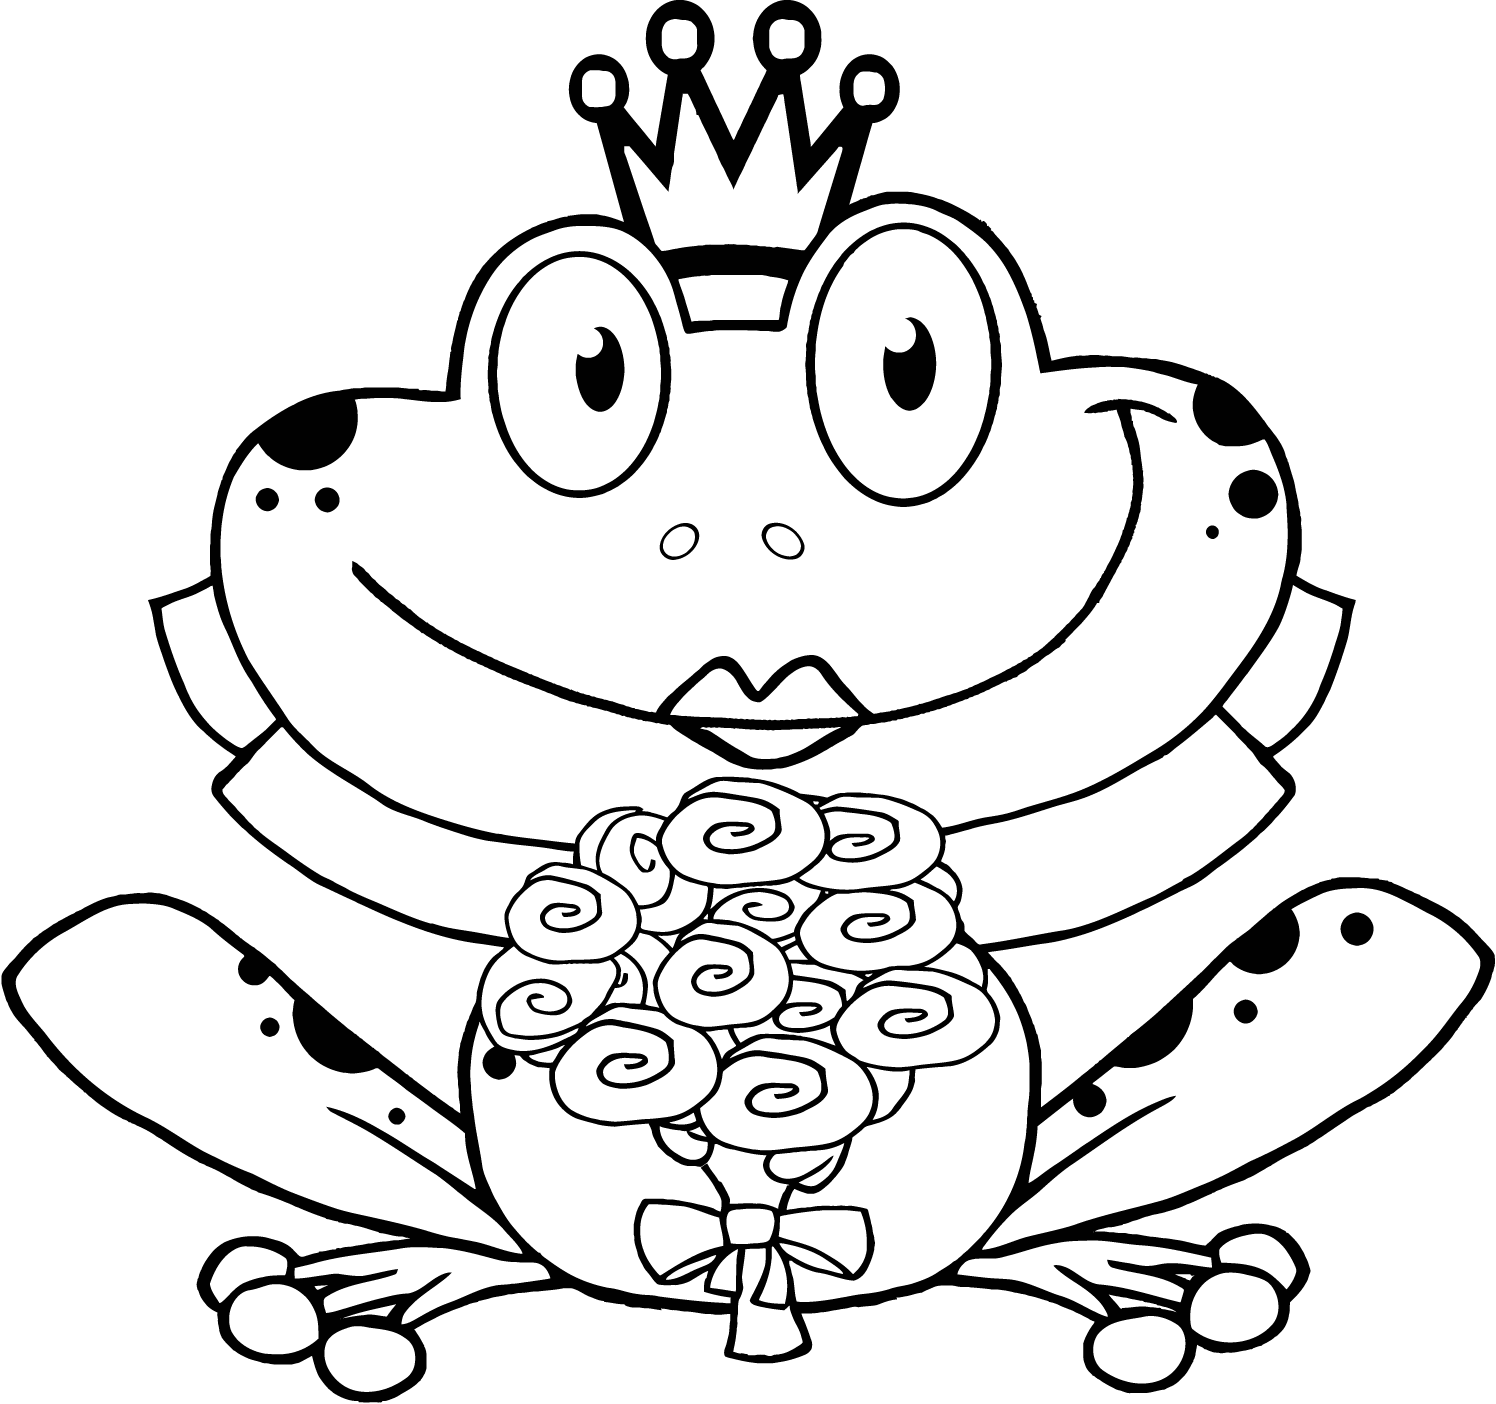 Coloring Pages Cartoon Bull Frog - Coloring Pages For All Ages